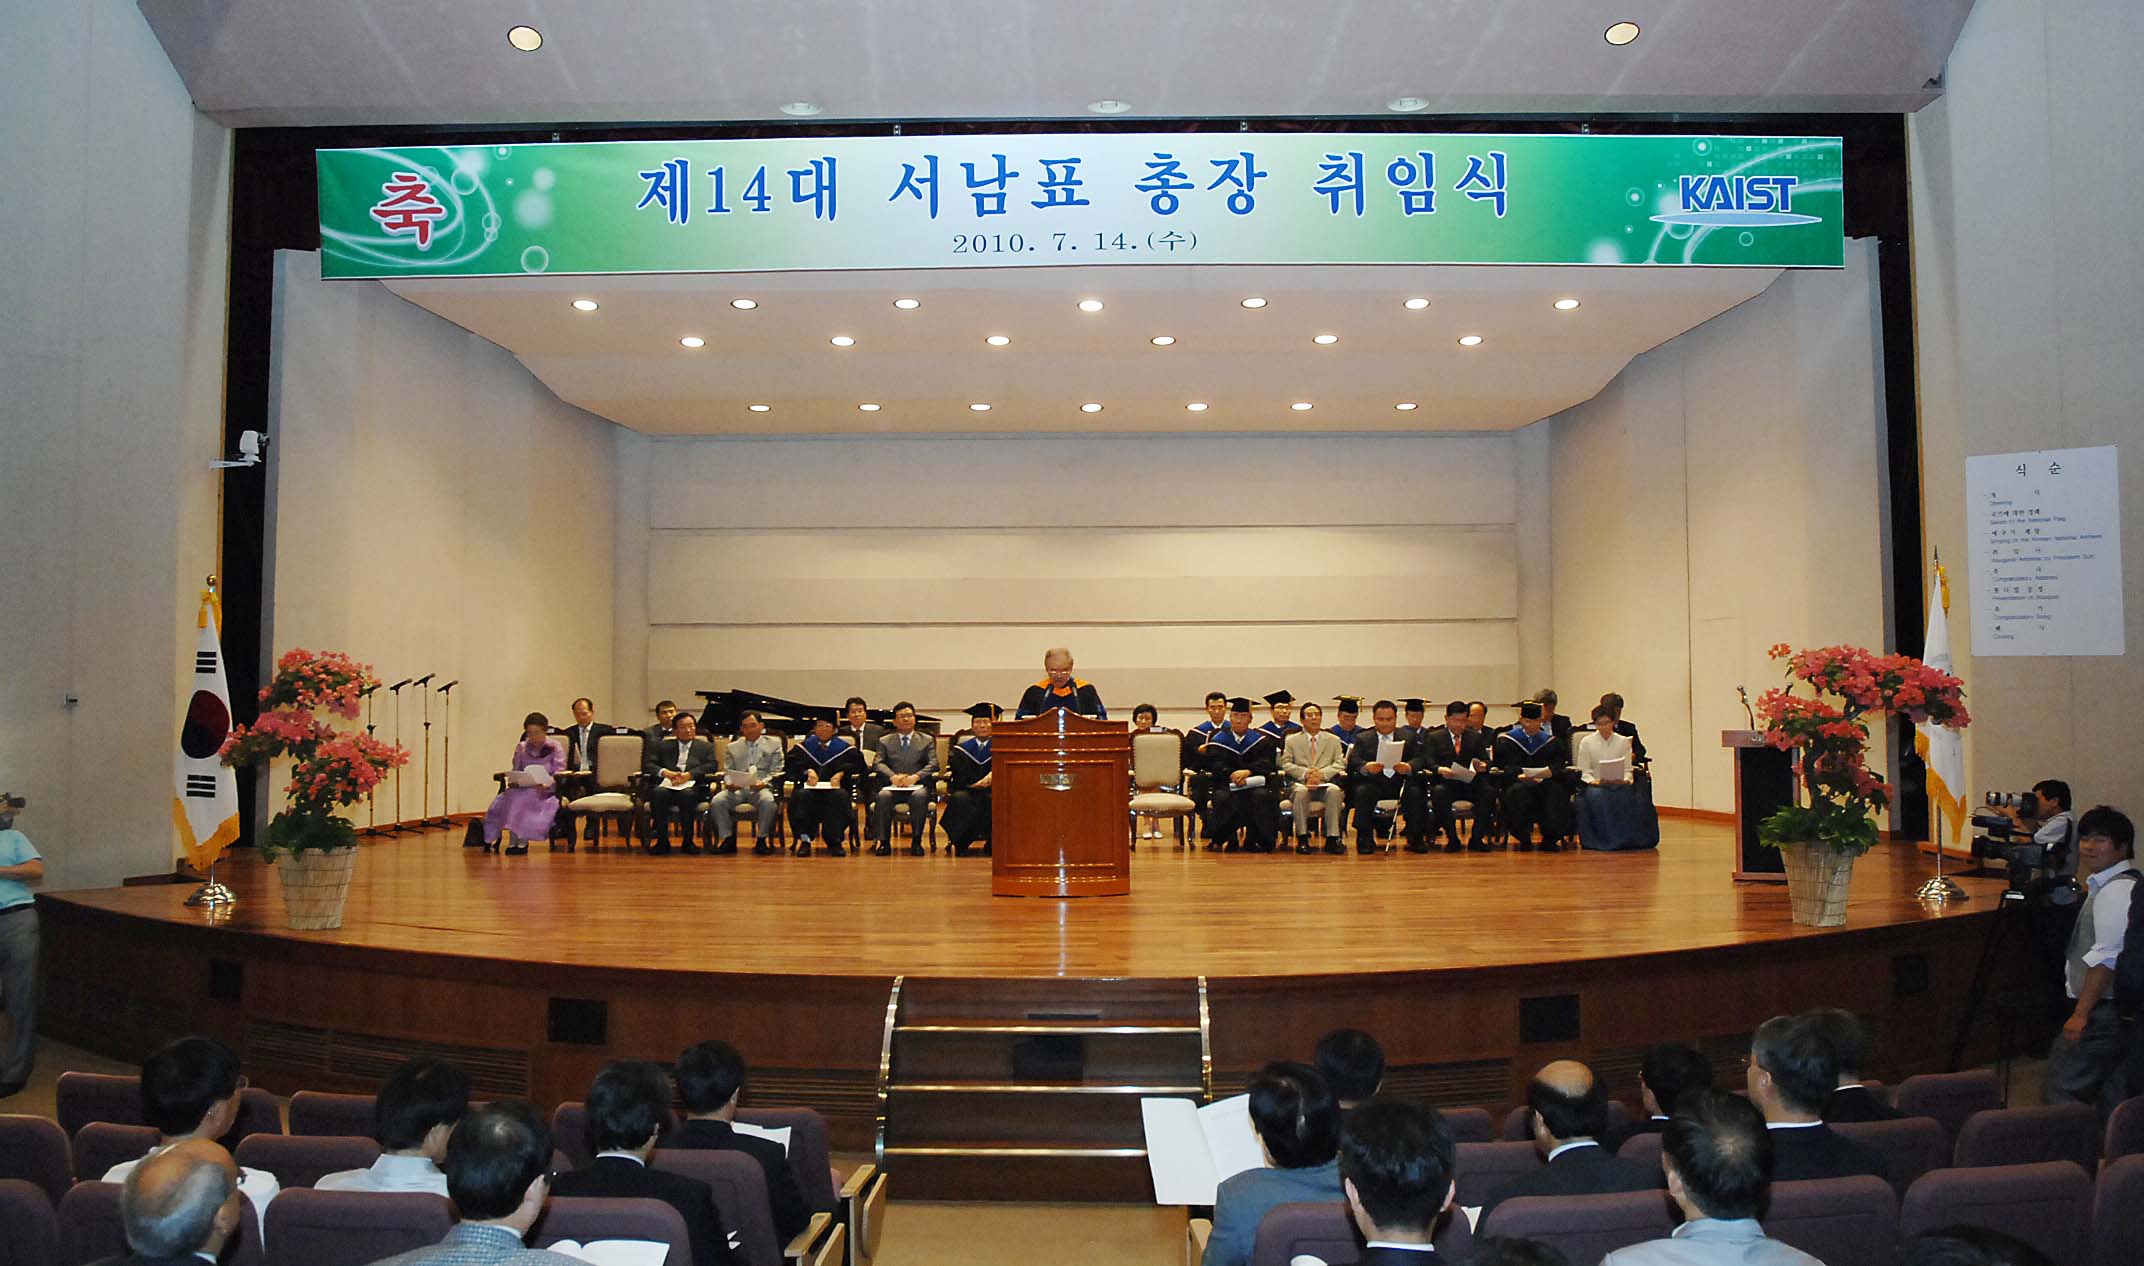 Inauguration ceremony for the 14th President of KAIST held on July 14, 2010 이미지